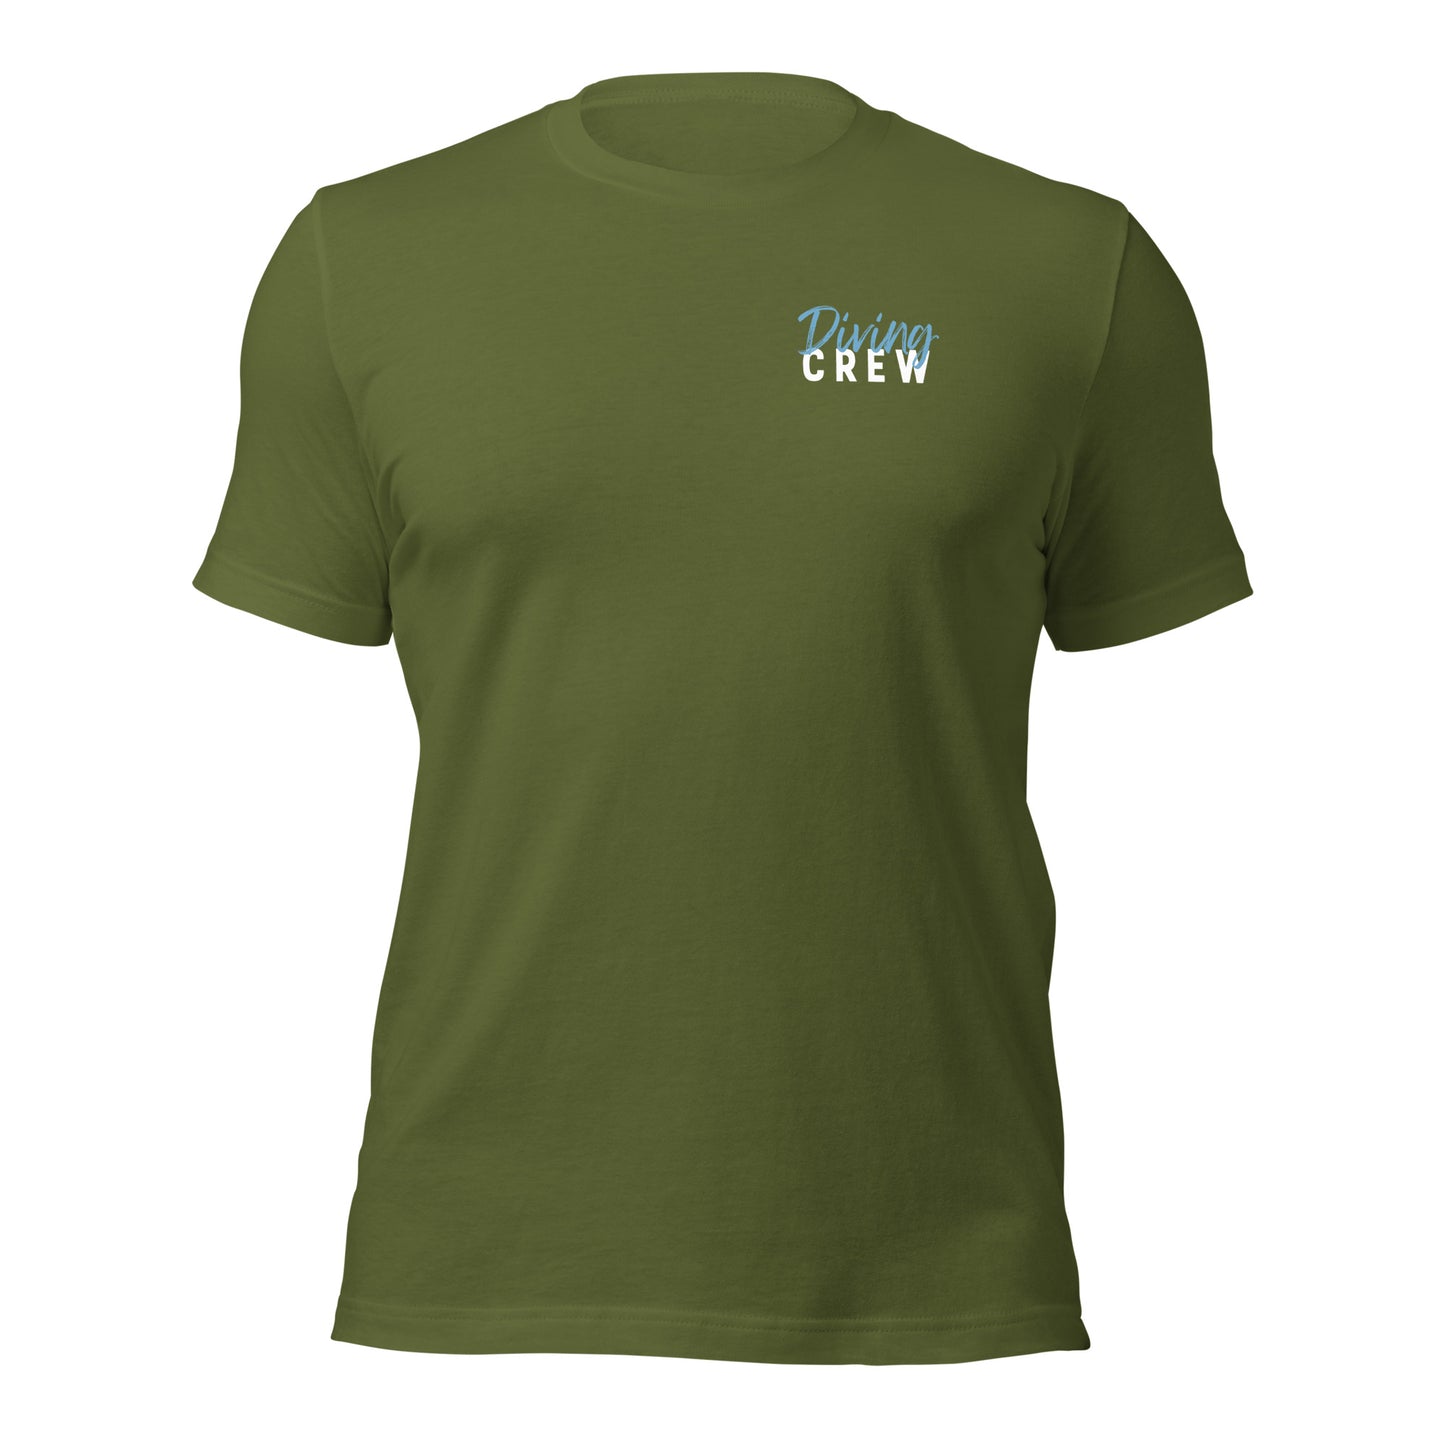 DIVING CREW & SPACESHIP WRECK T-Shirt - The Diving Universe by Kristine Kathryn Rusch